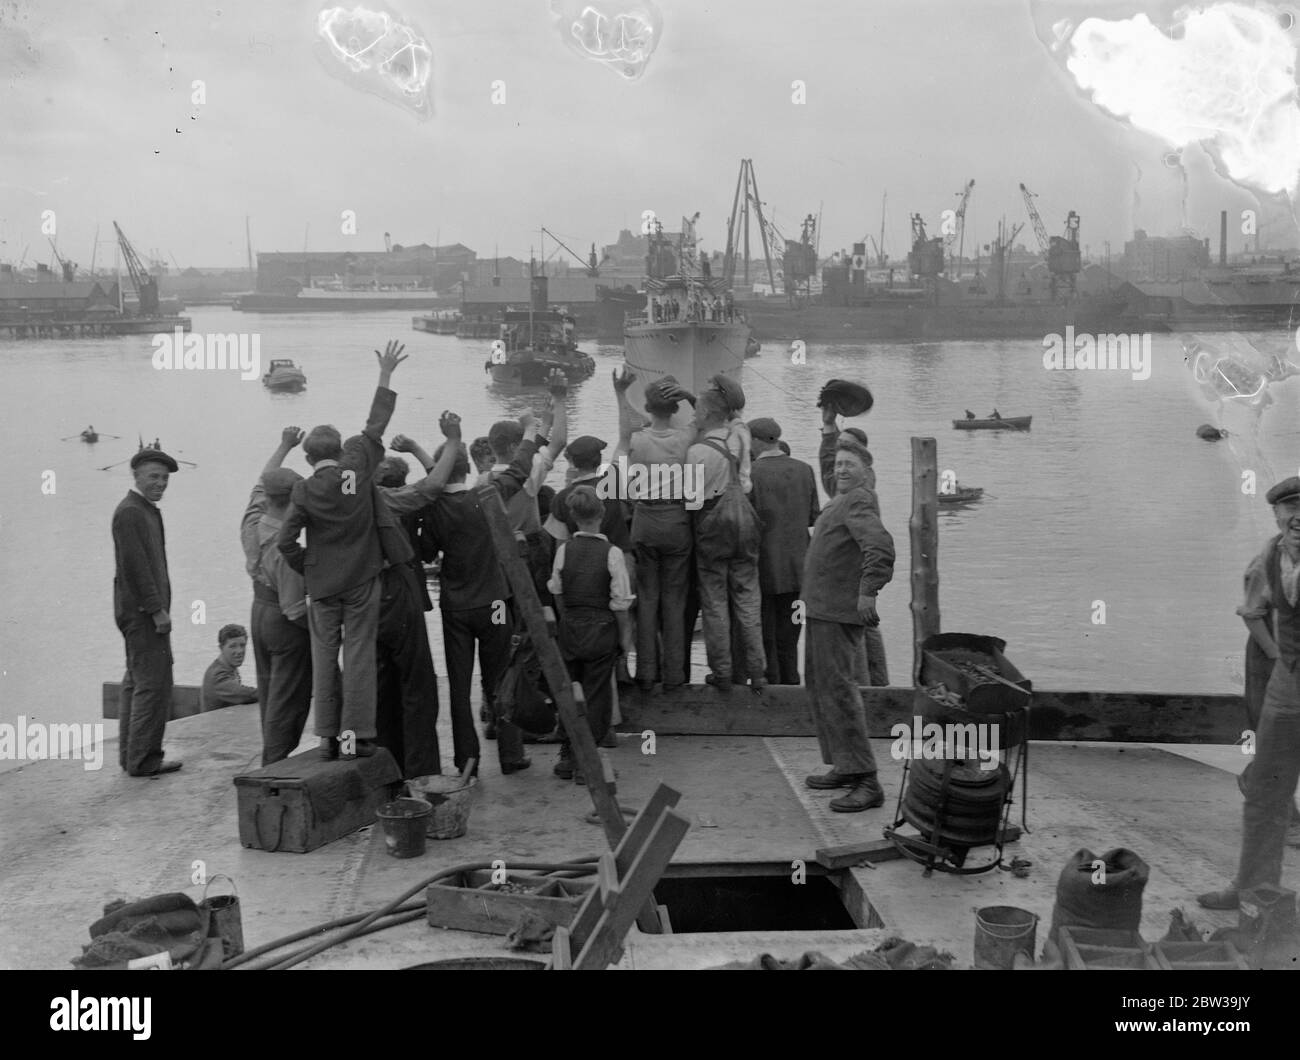 New HMS Grafton (H89) a G-class destroyer launched by Lady Barrie at Messrs Thorneycroft's yards at Woolston near Southampton . Photo shows workmen showing their delight at the completion of their work on HMS Grafton who sits proudly on her own lines infront of them . 22 July 1935 Stock Photo